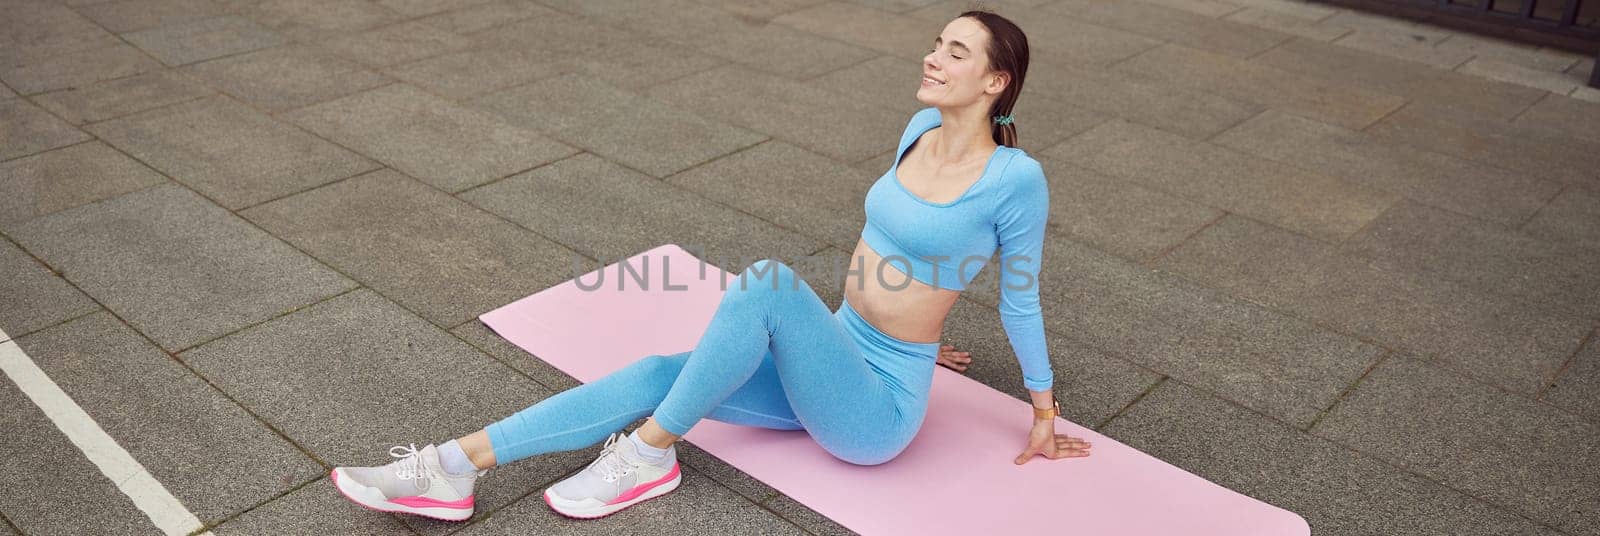 Beautiful fit caucasian woman is doing exercises outdoors at the city